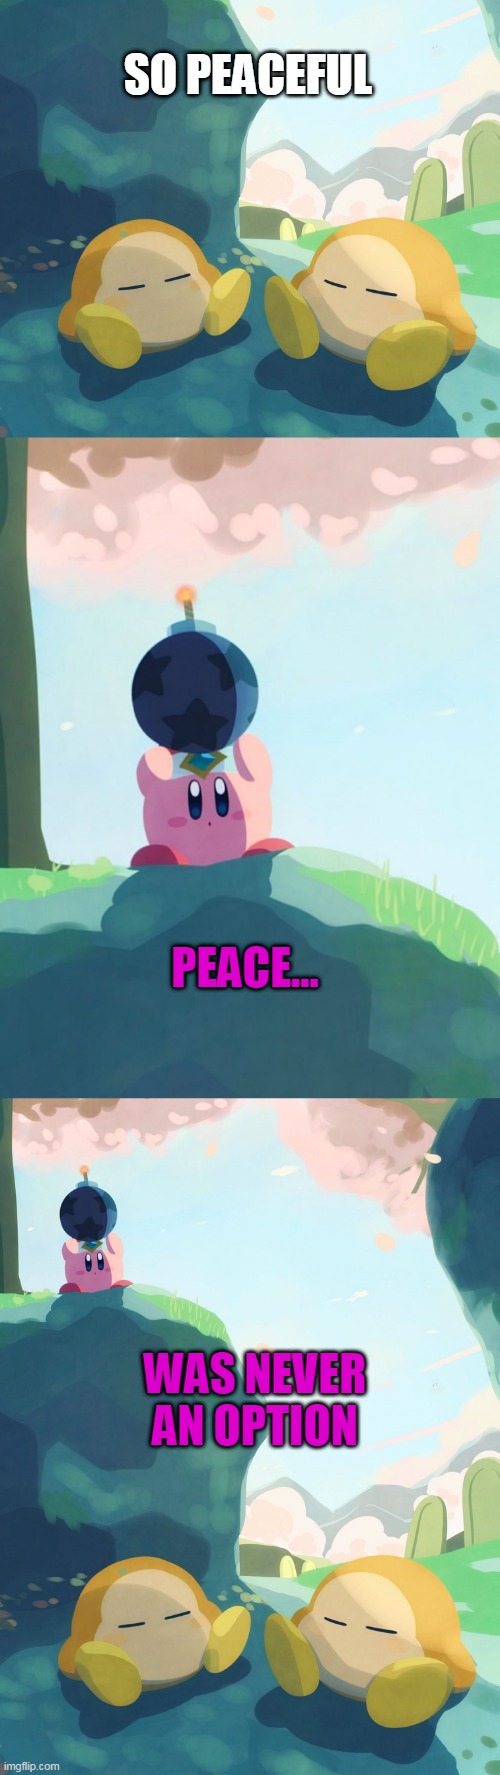 WHY KIRBY? | SO PEACEFUL; PEACE... WAS NEVER AN OPTION | image tagged in memes,kirby,untitled goose peace was never an option,pissed off kirby | made w/ Imgflip meme maker